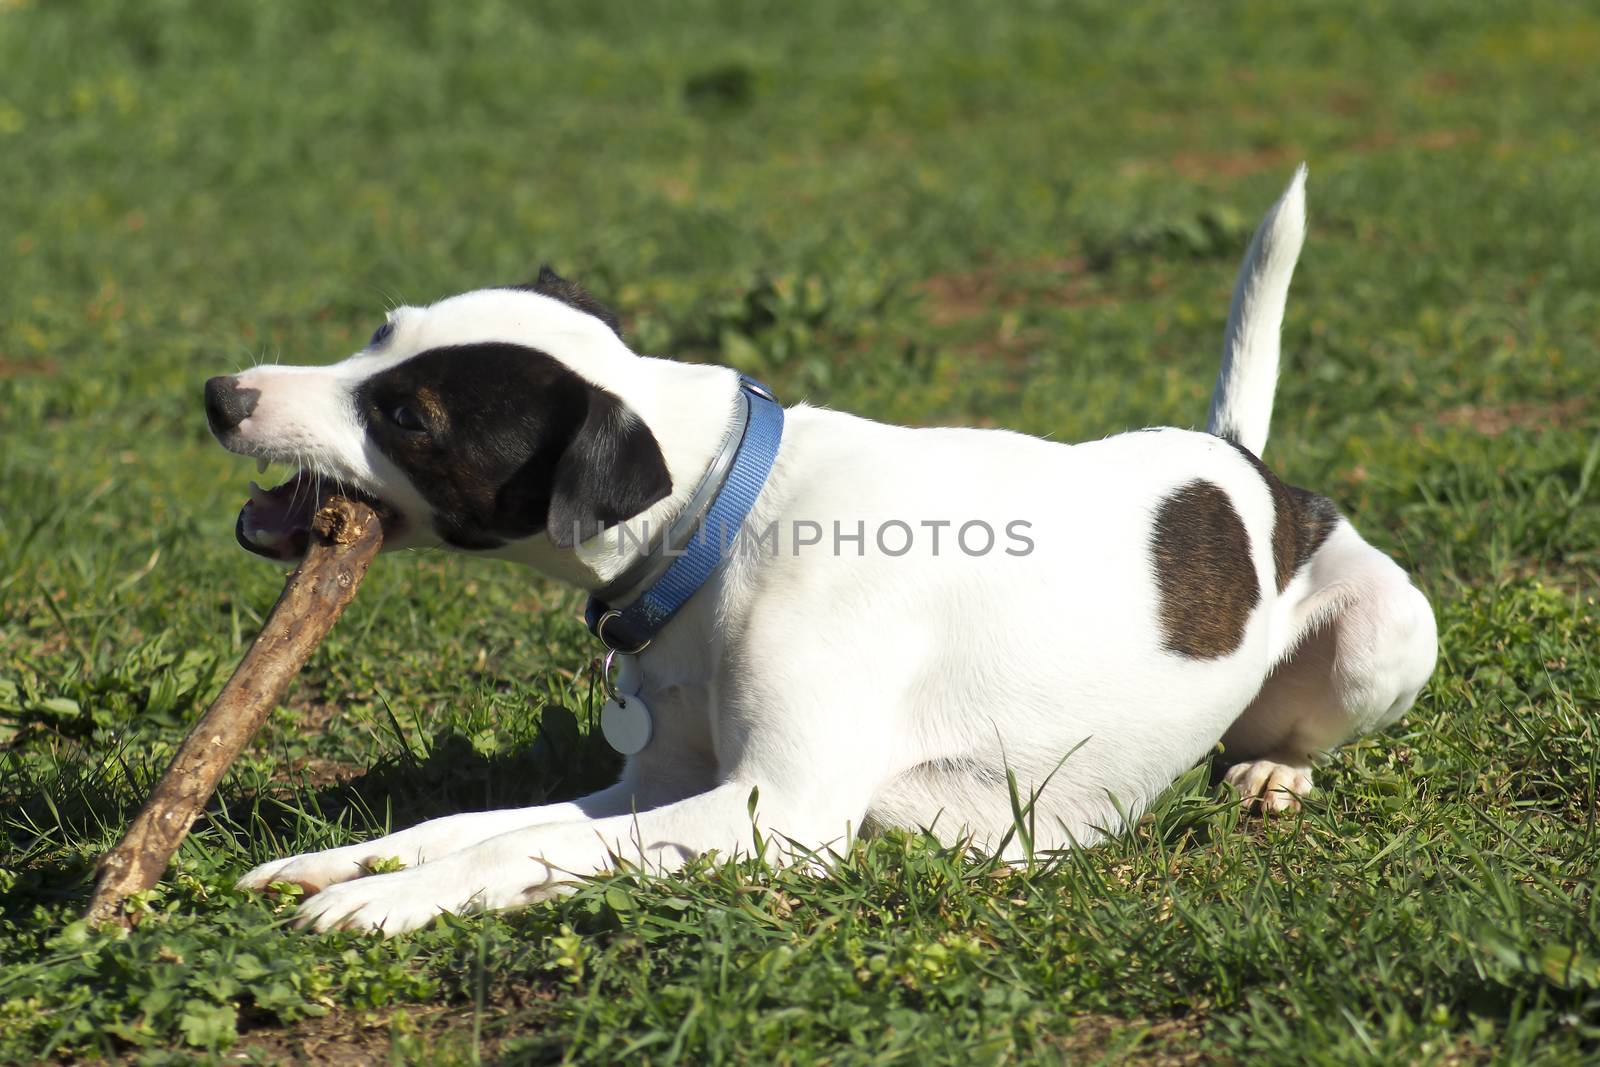 Jack Russell Terrier dog, lies on the grass and bites the stick